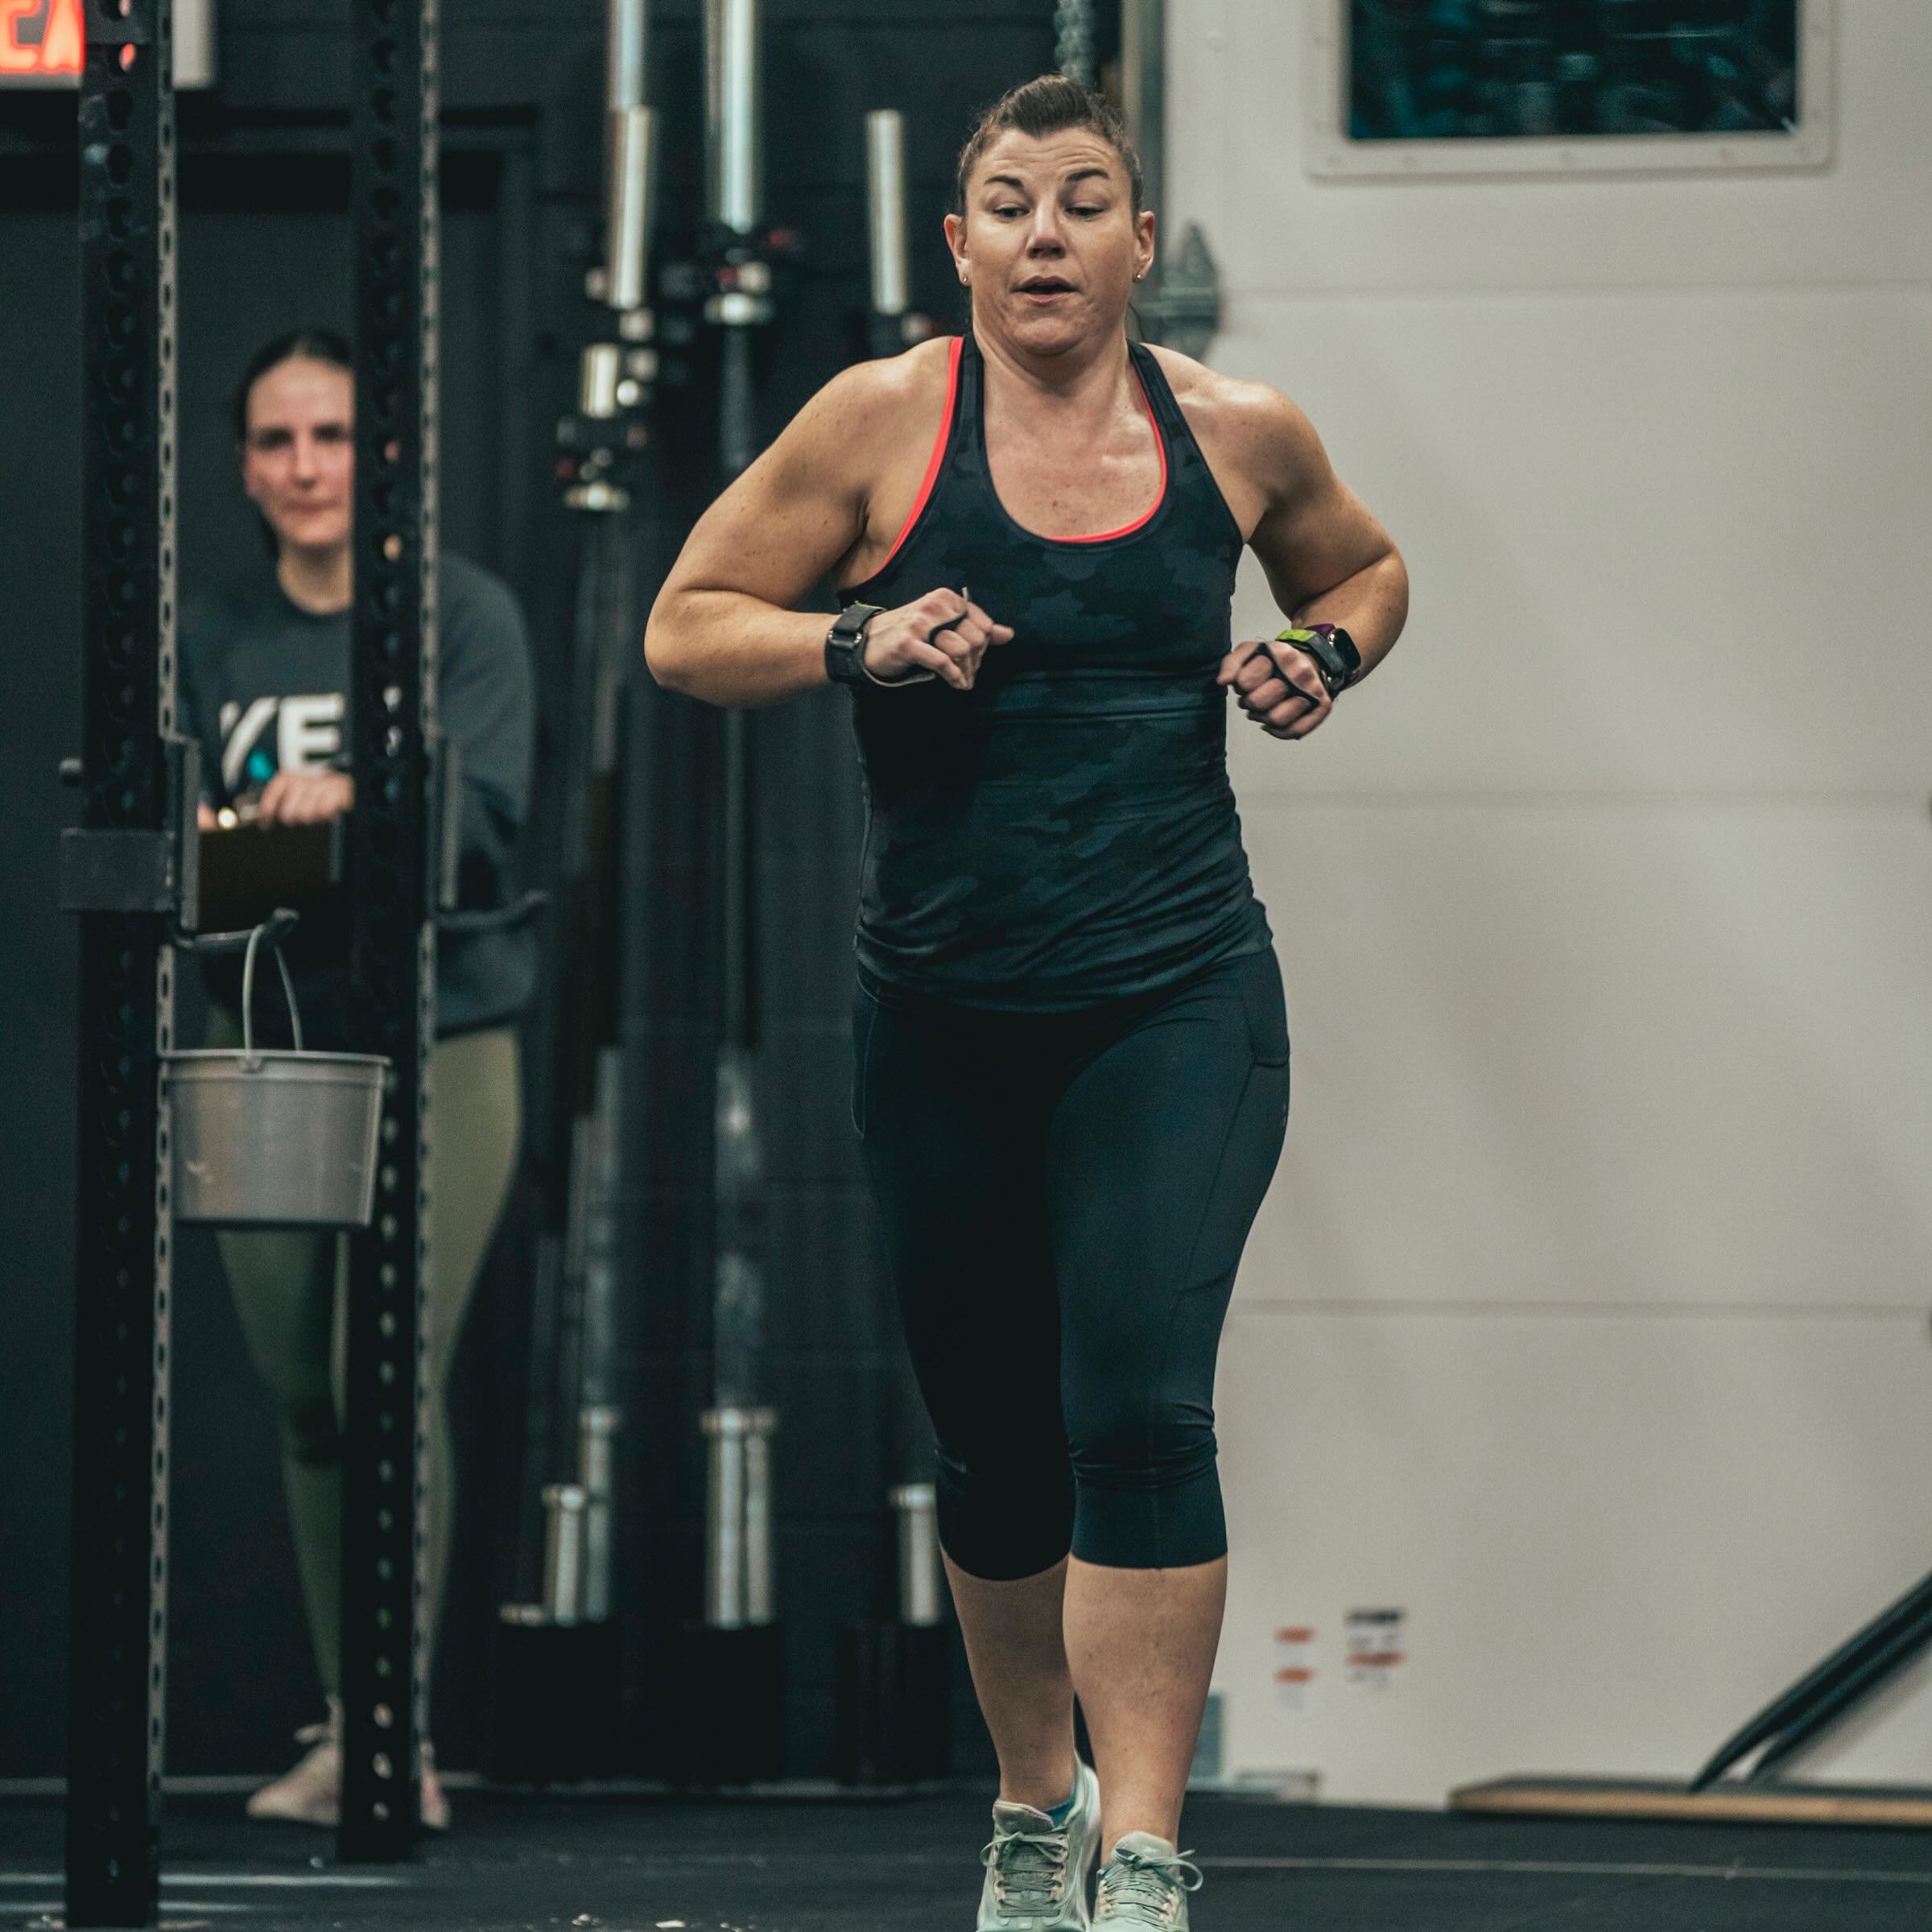 Throwing it back to crushing it in the 2023 CrossFit Open! 

💪 #WayBackWednesday #CrossFitOpen